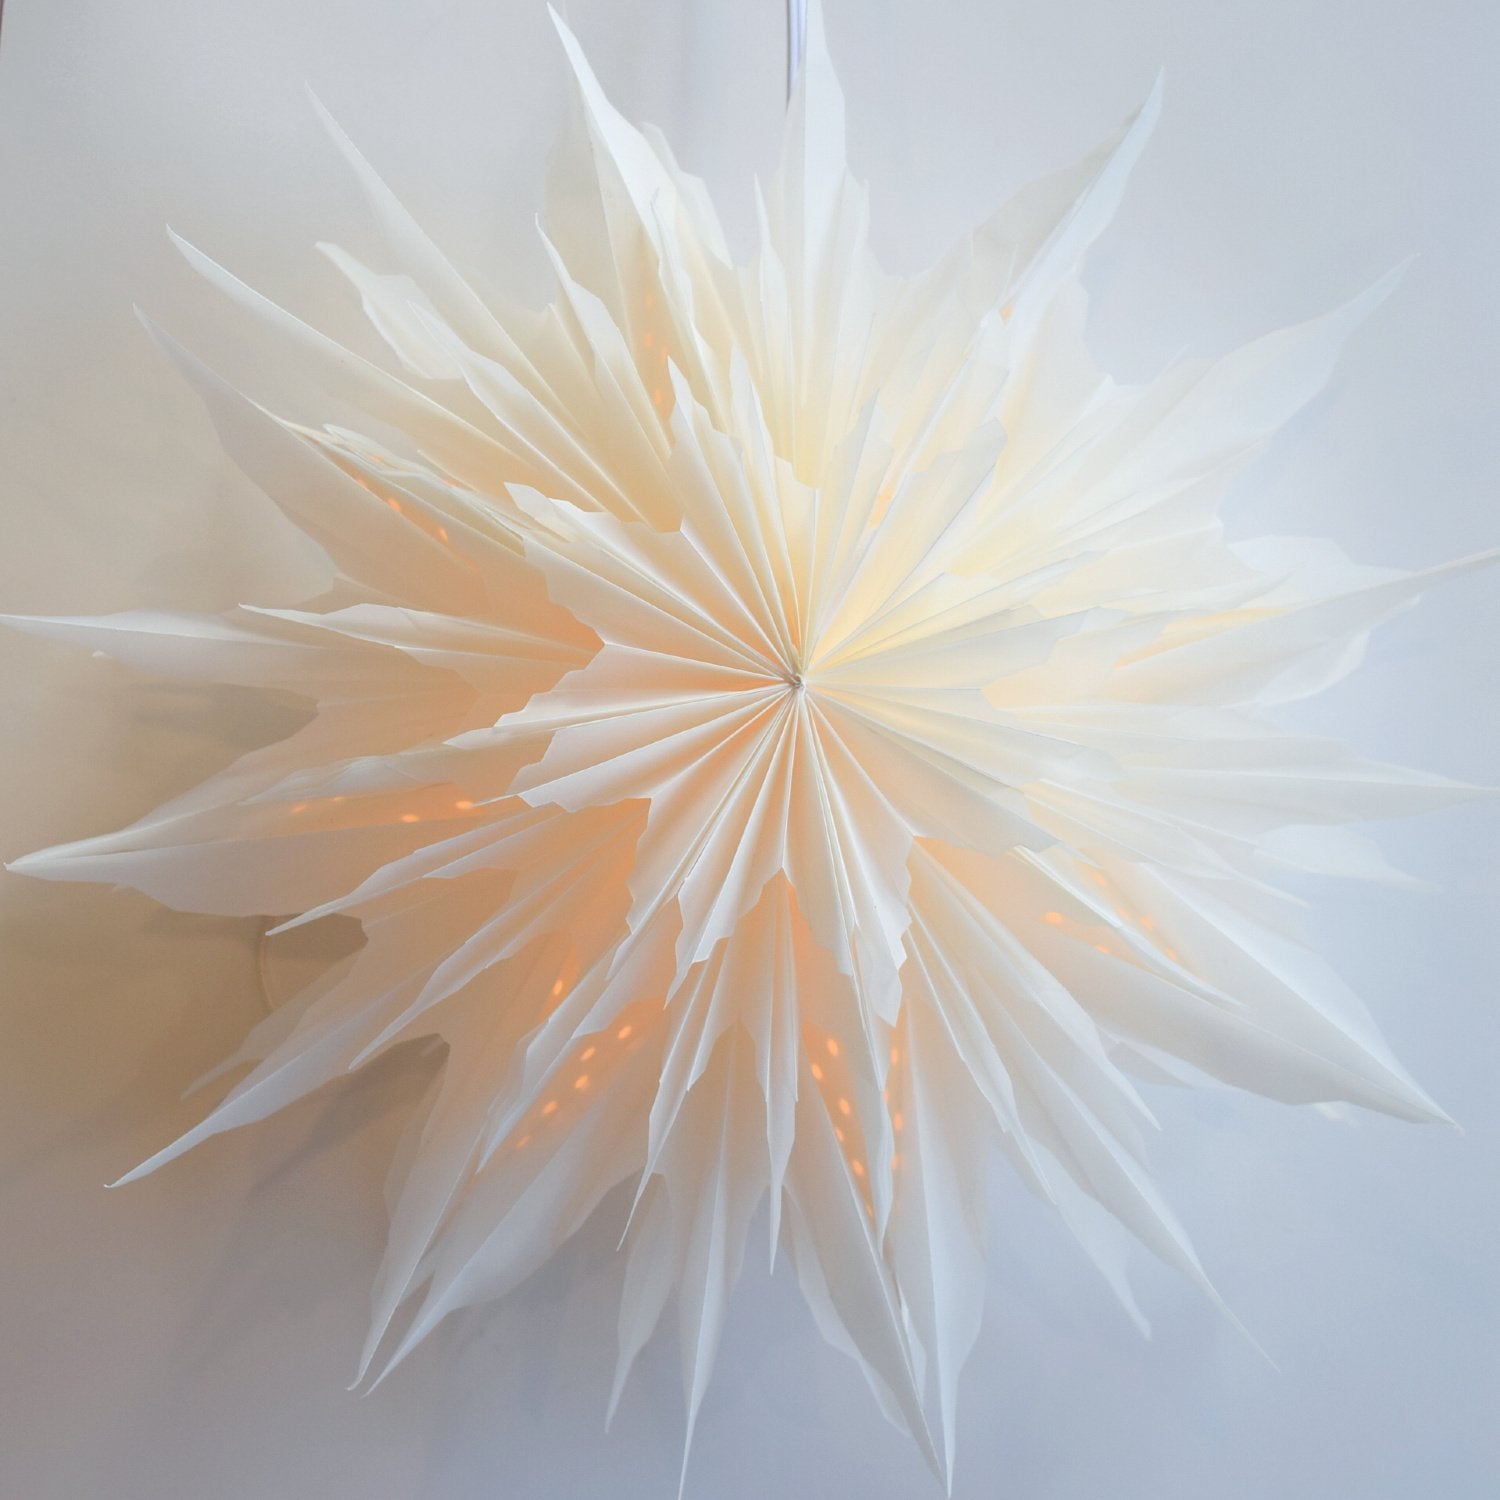 32" White Snowdrift Snowflake Star Lantern Pizzelle Design - Great With or Without Lights - Ideal for Holiday and Snowflake Decorations, Weddings, Parties, and Home Decor